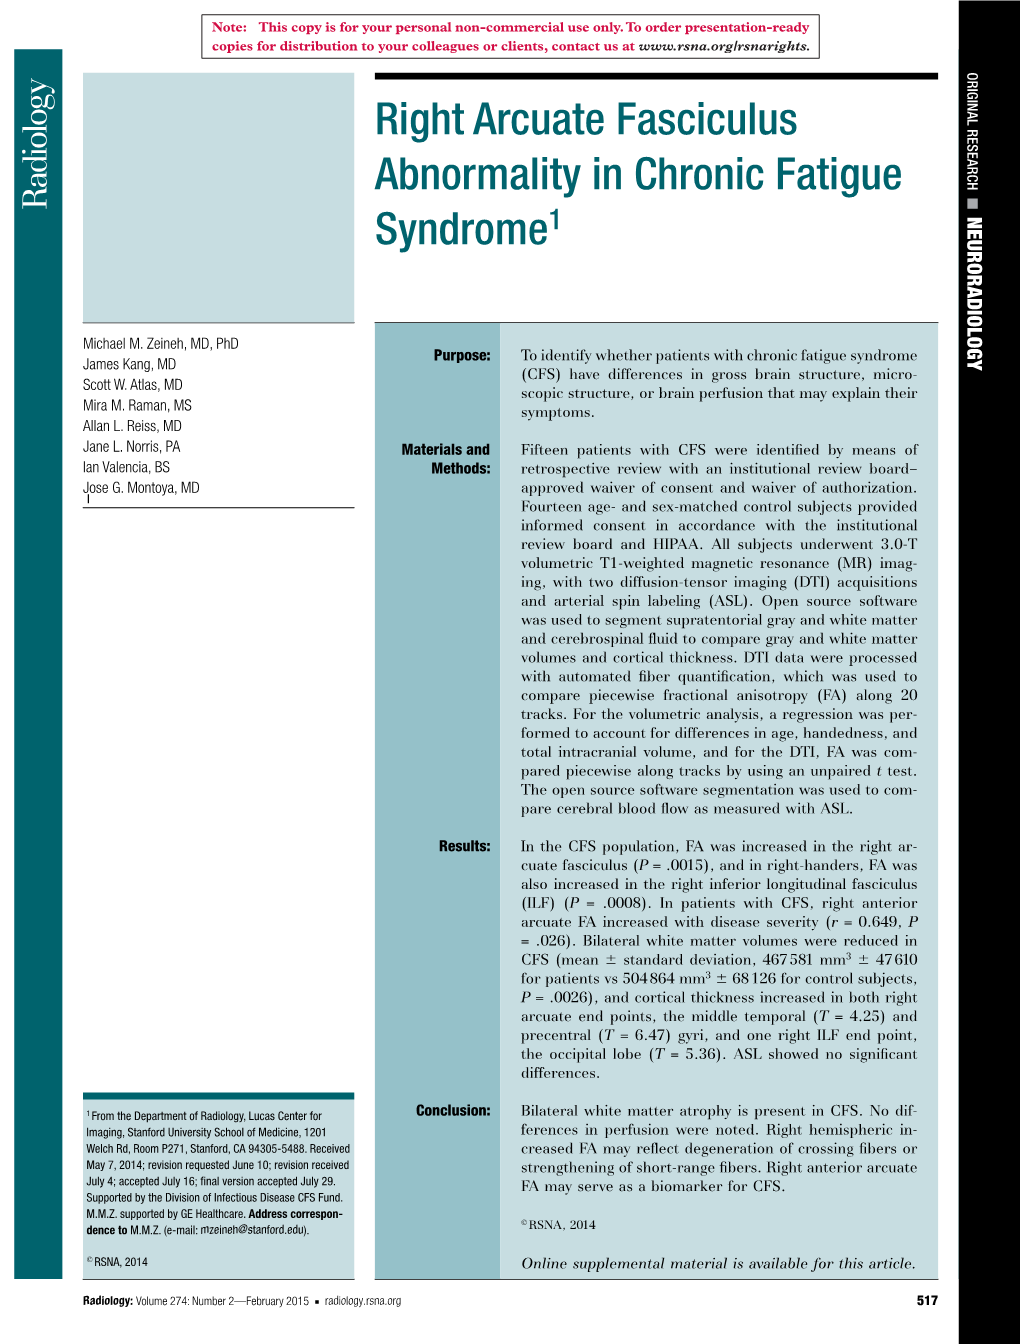 Right Arcuate Fasciculus Abnormality in Chronic Fatigue Syndrome1